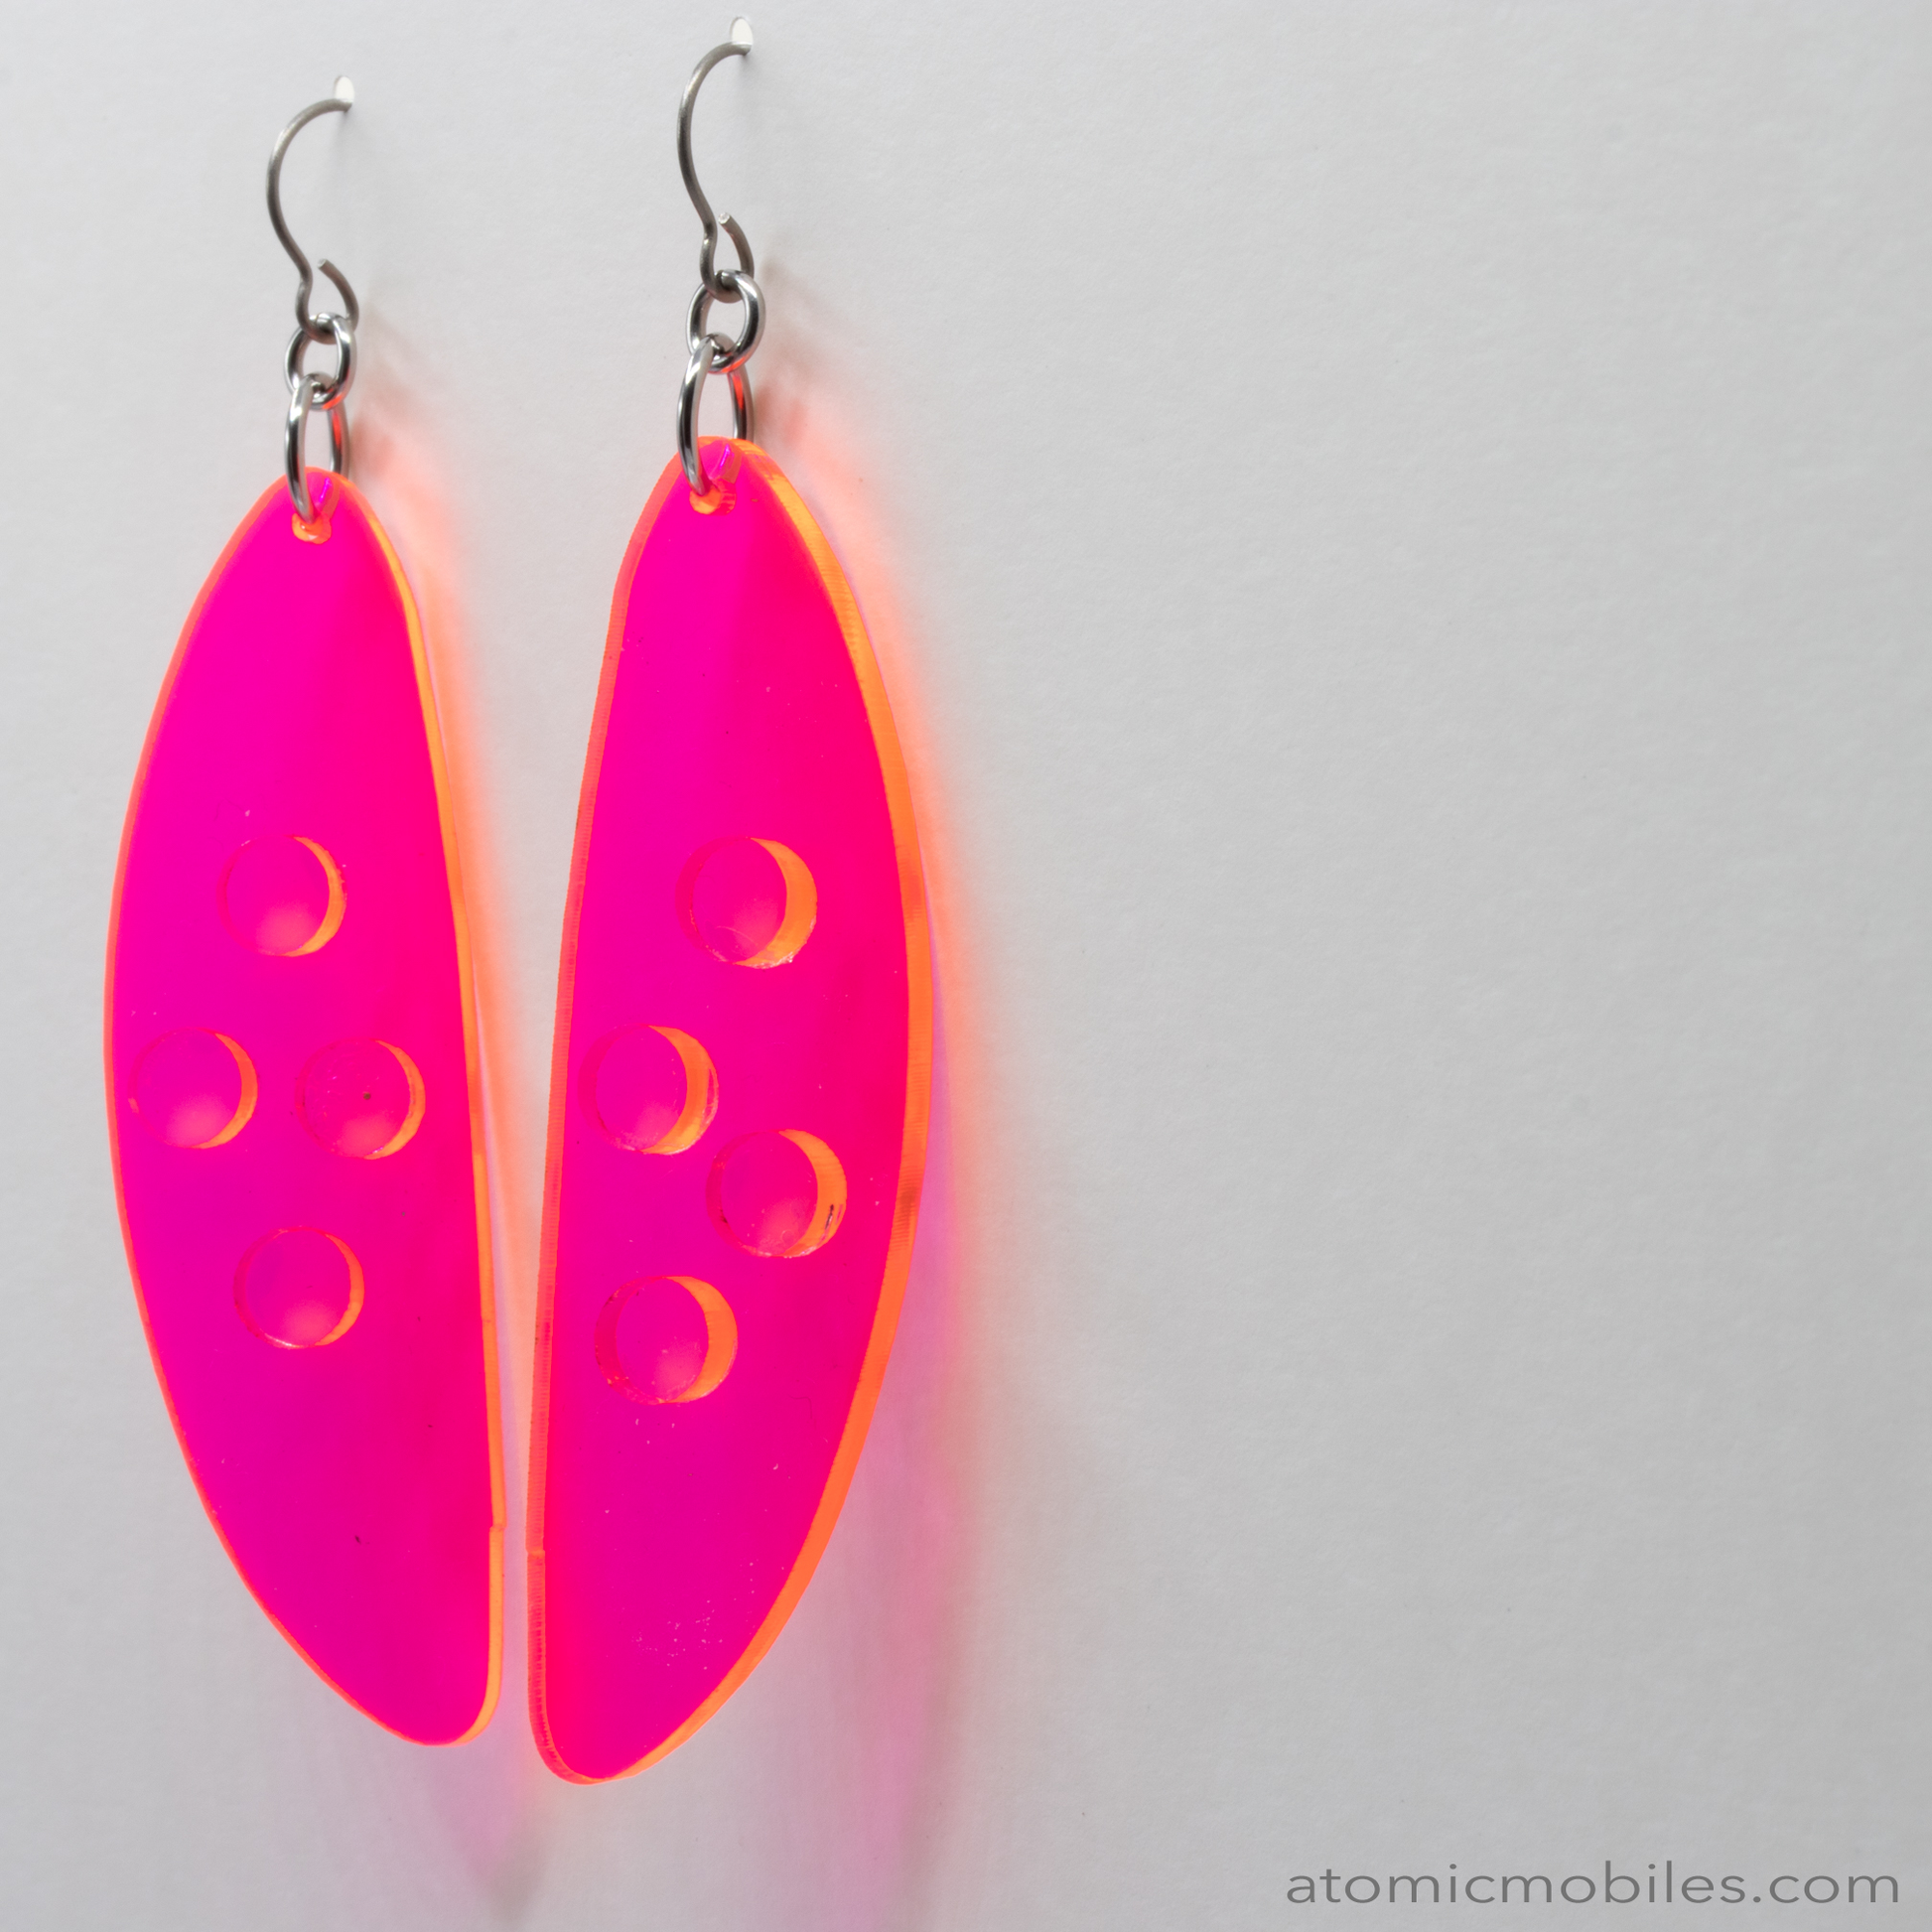 POPdots modern retro statement earrings in Yellow and Neon Fluorescent Hot Pink acrylic by AtomicMobiles.com